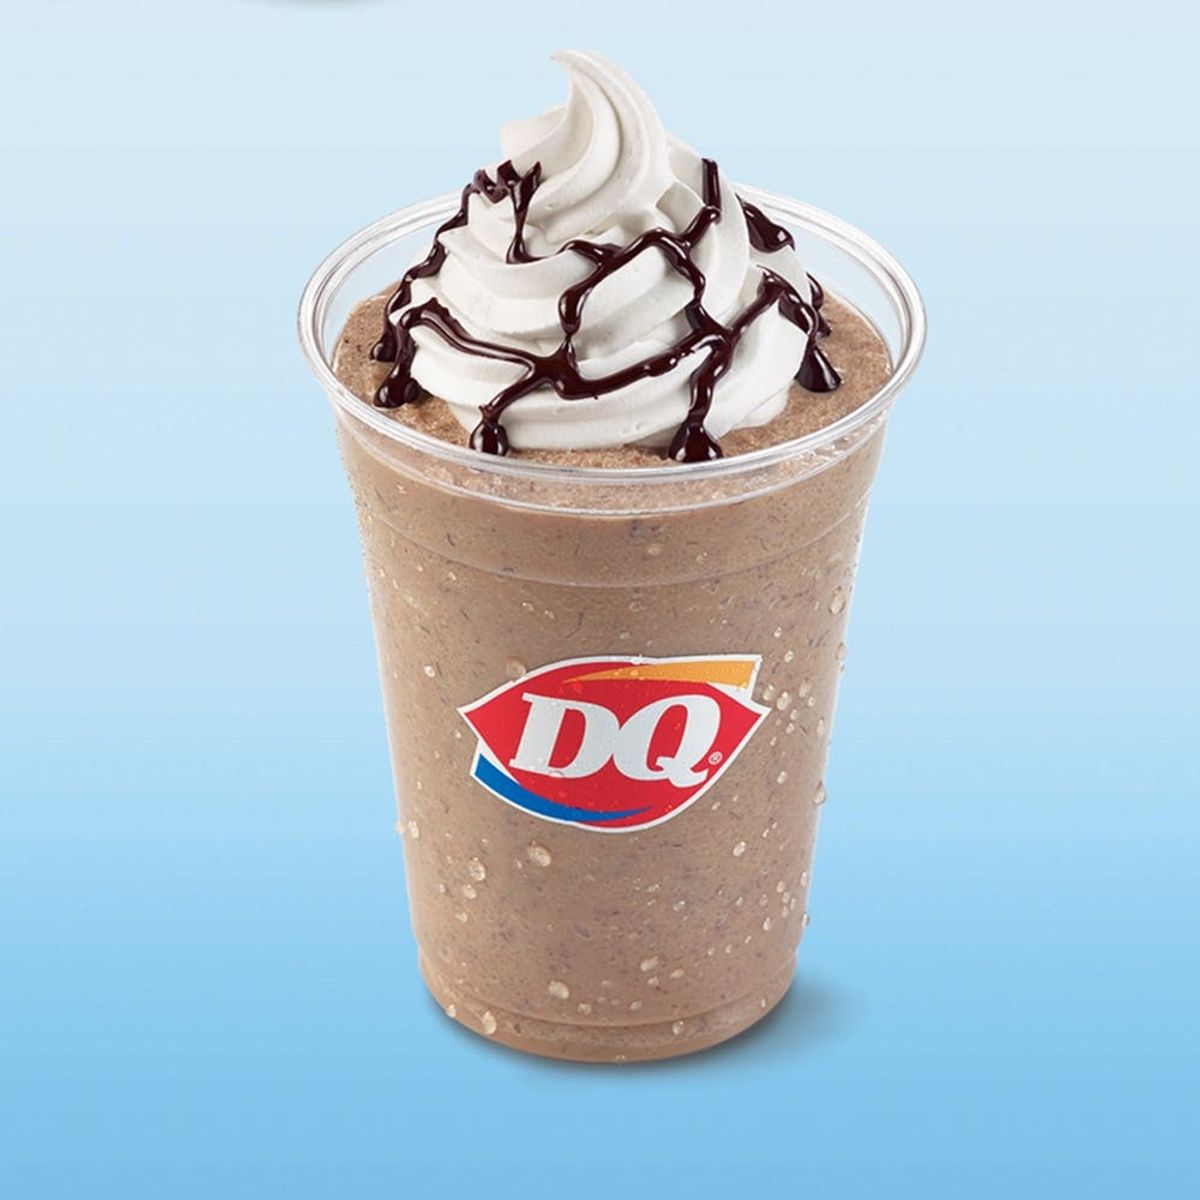 Why Dairy Queen Is About to Be Your New Starbucks